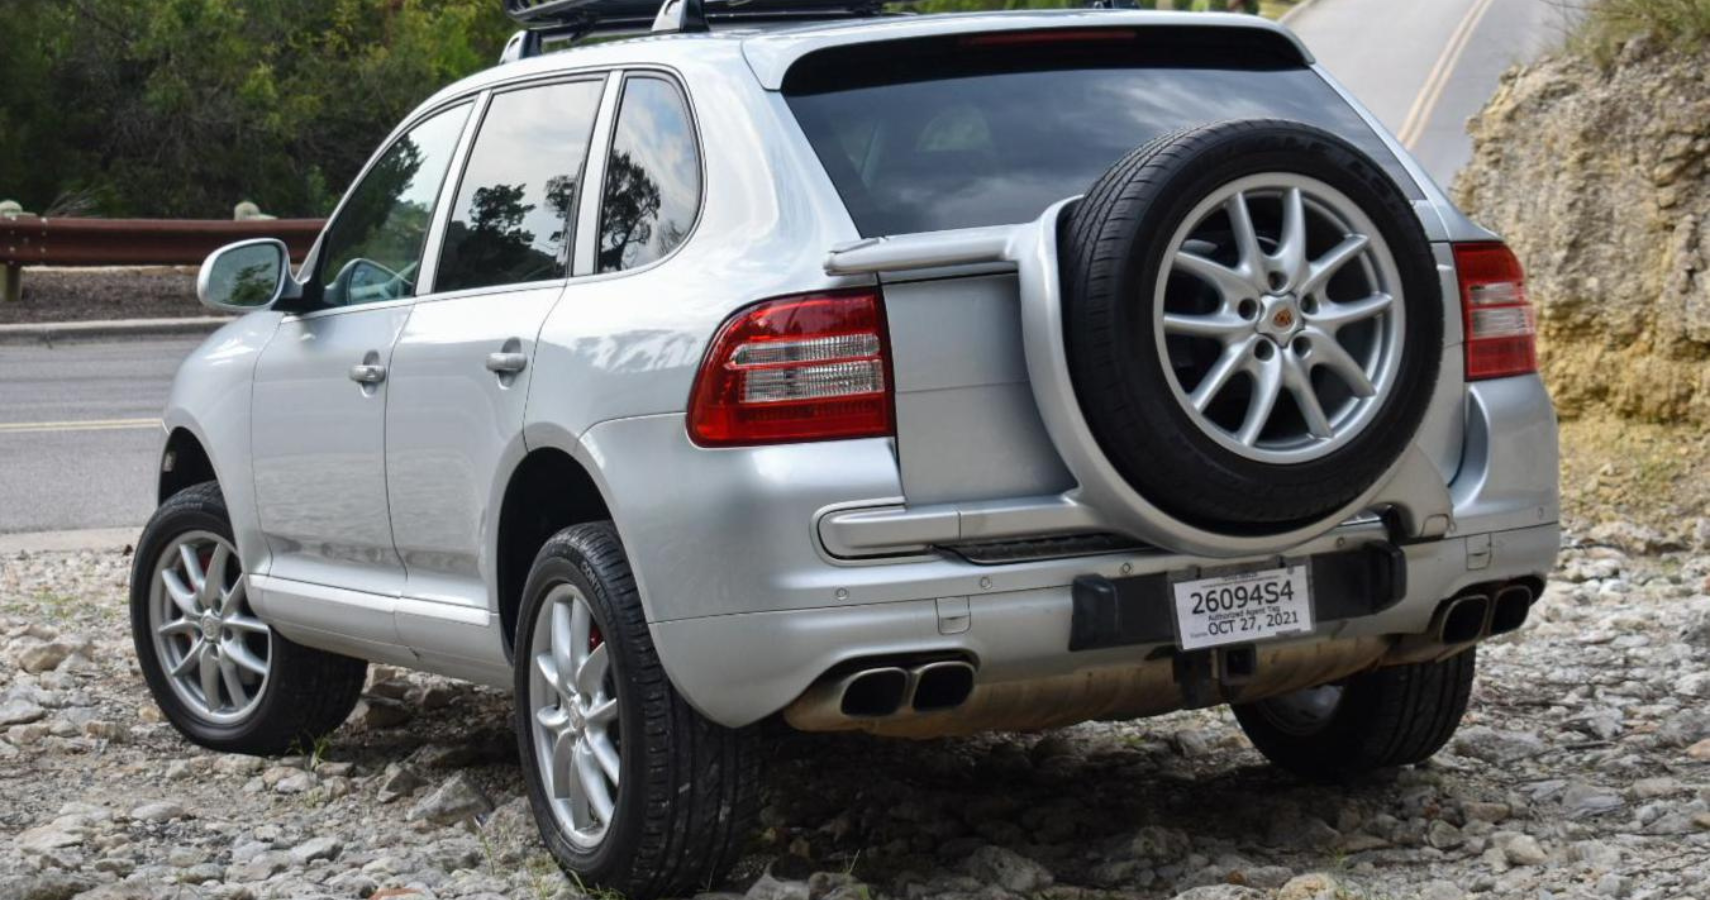 Why The 2004 Porsche Cayenne First Edition Was An Overengineered Super SUV